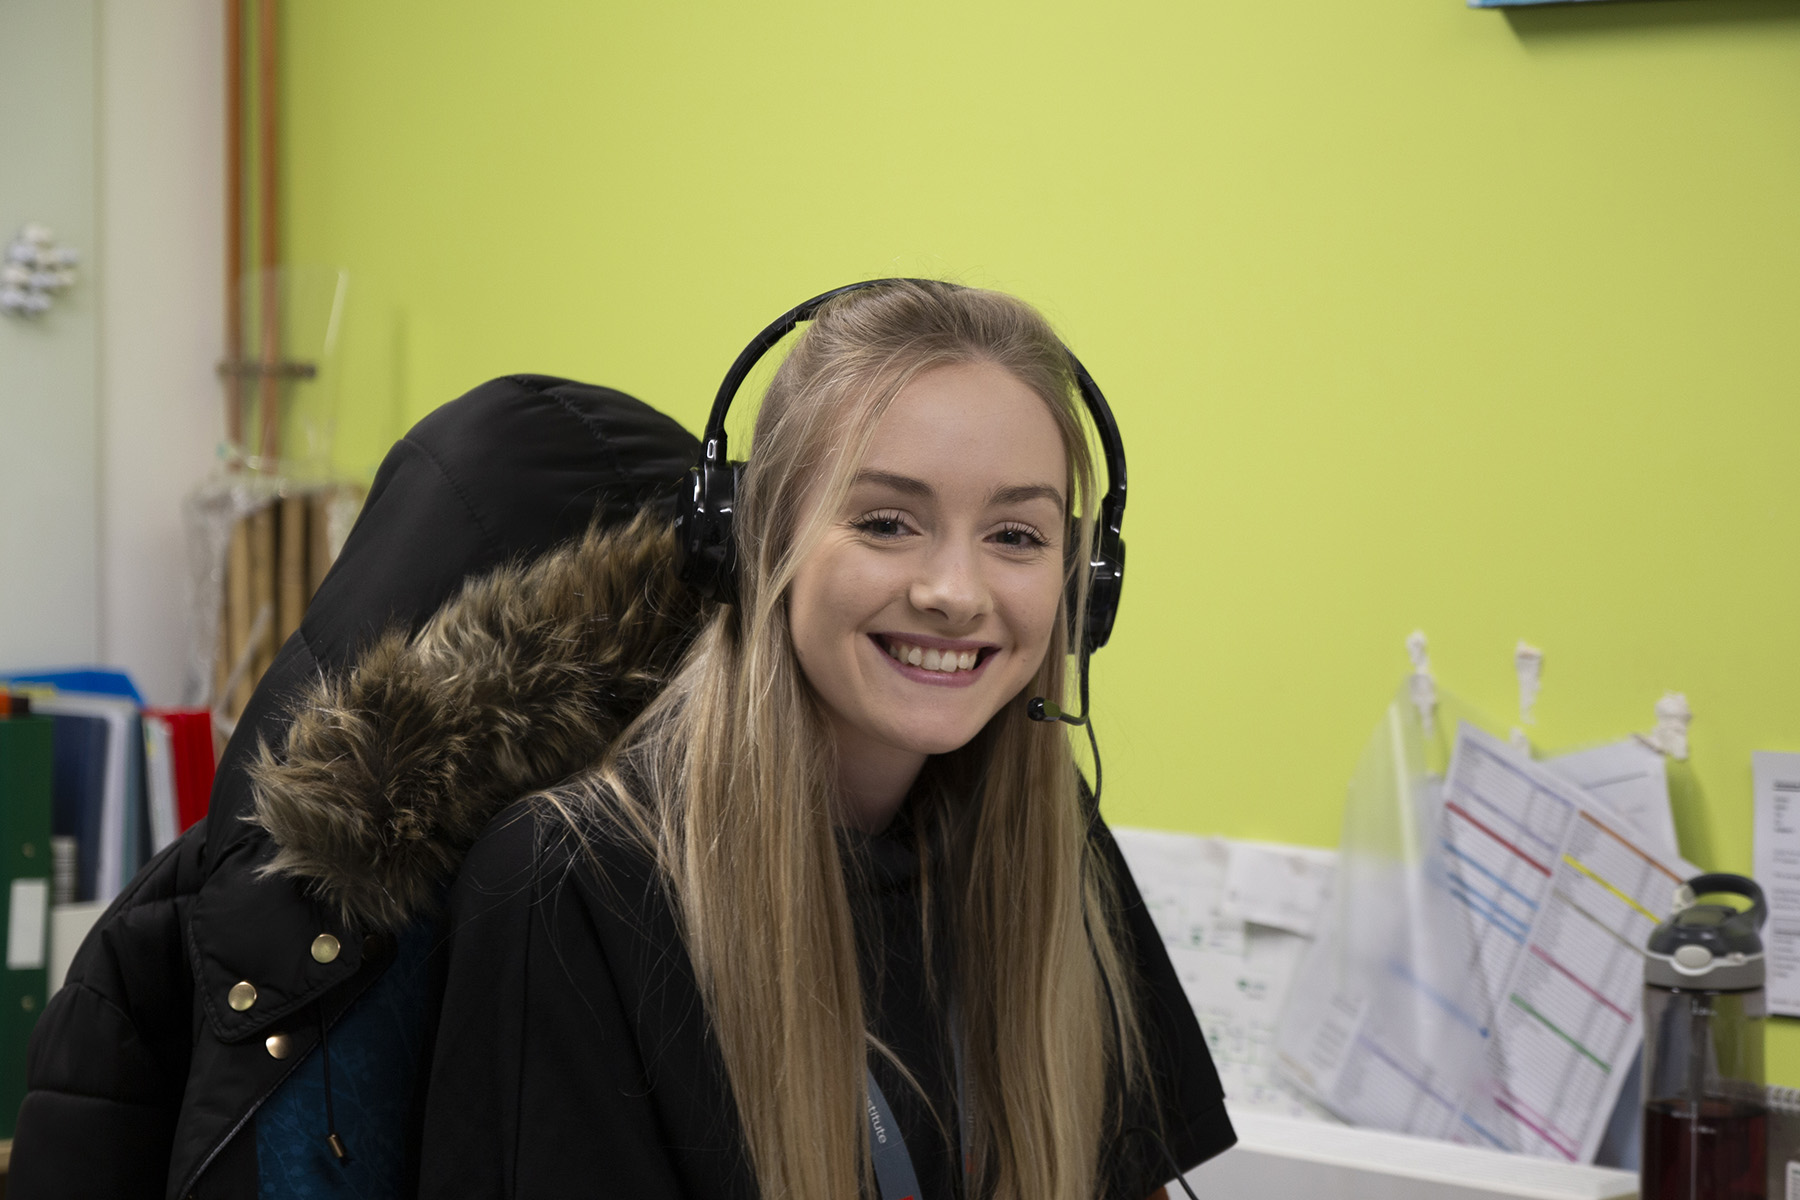 Image: Leigh, Business Support Assistant at Earlham Institute